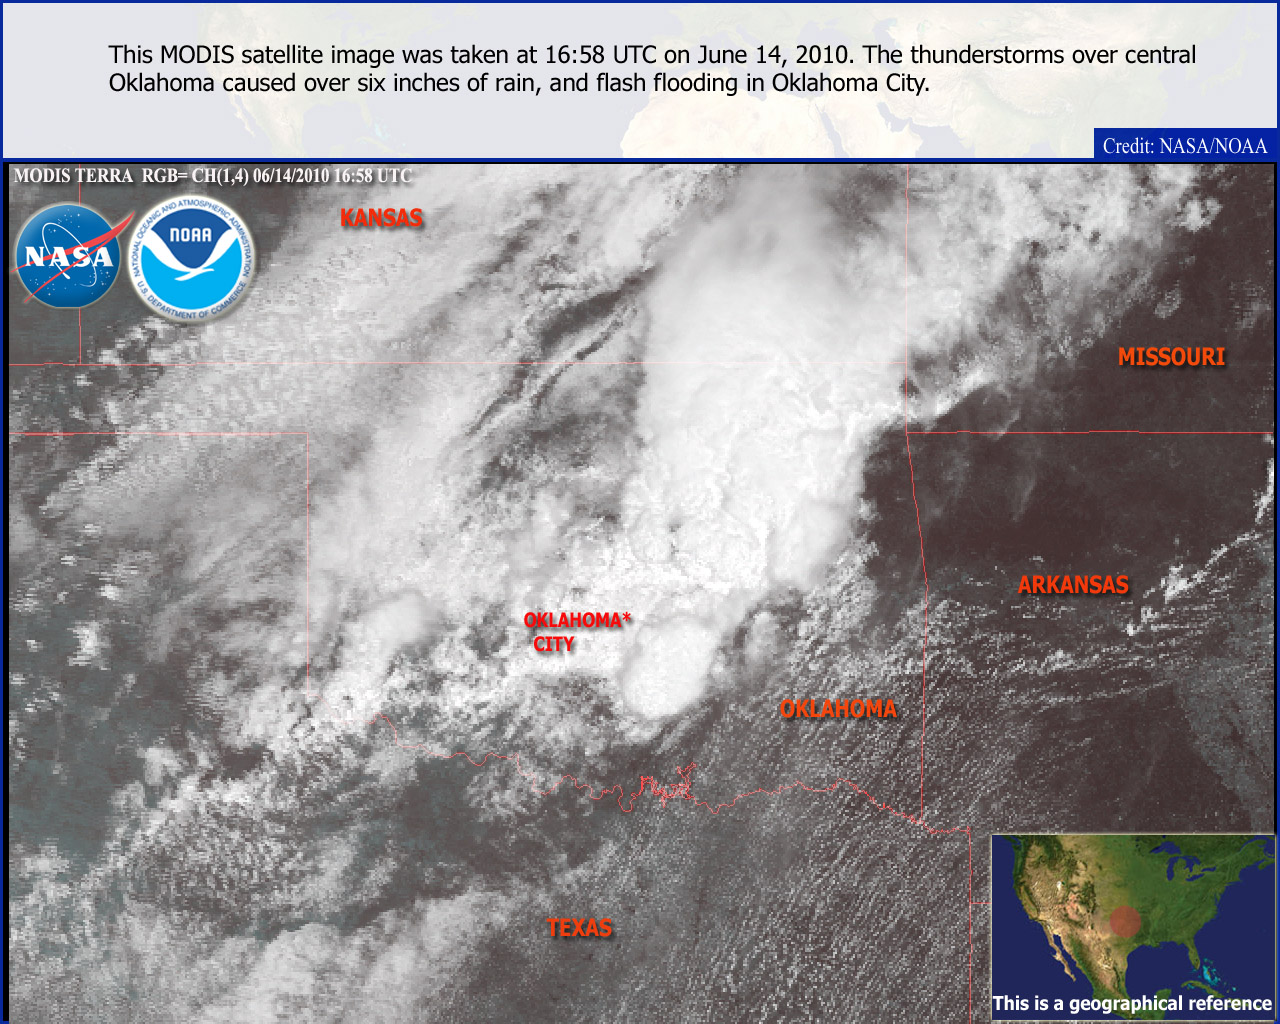 Satellite imagery of thunderstorms over central Oklahoma on 14 June 2010